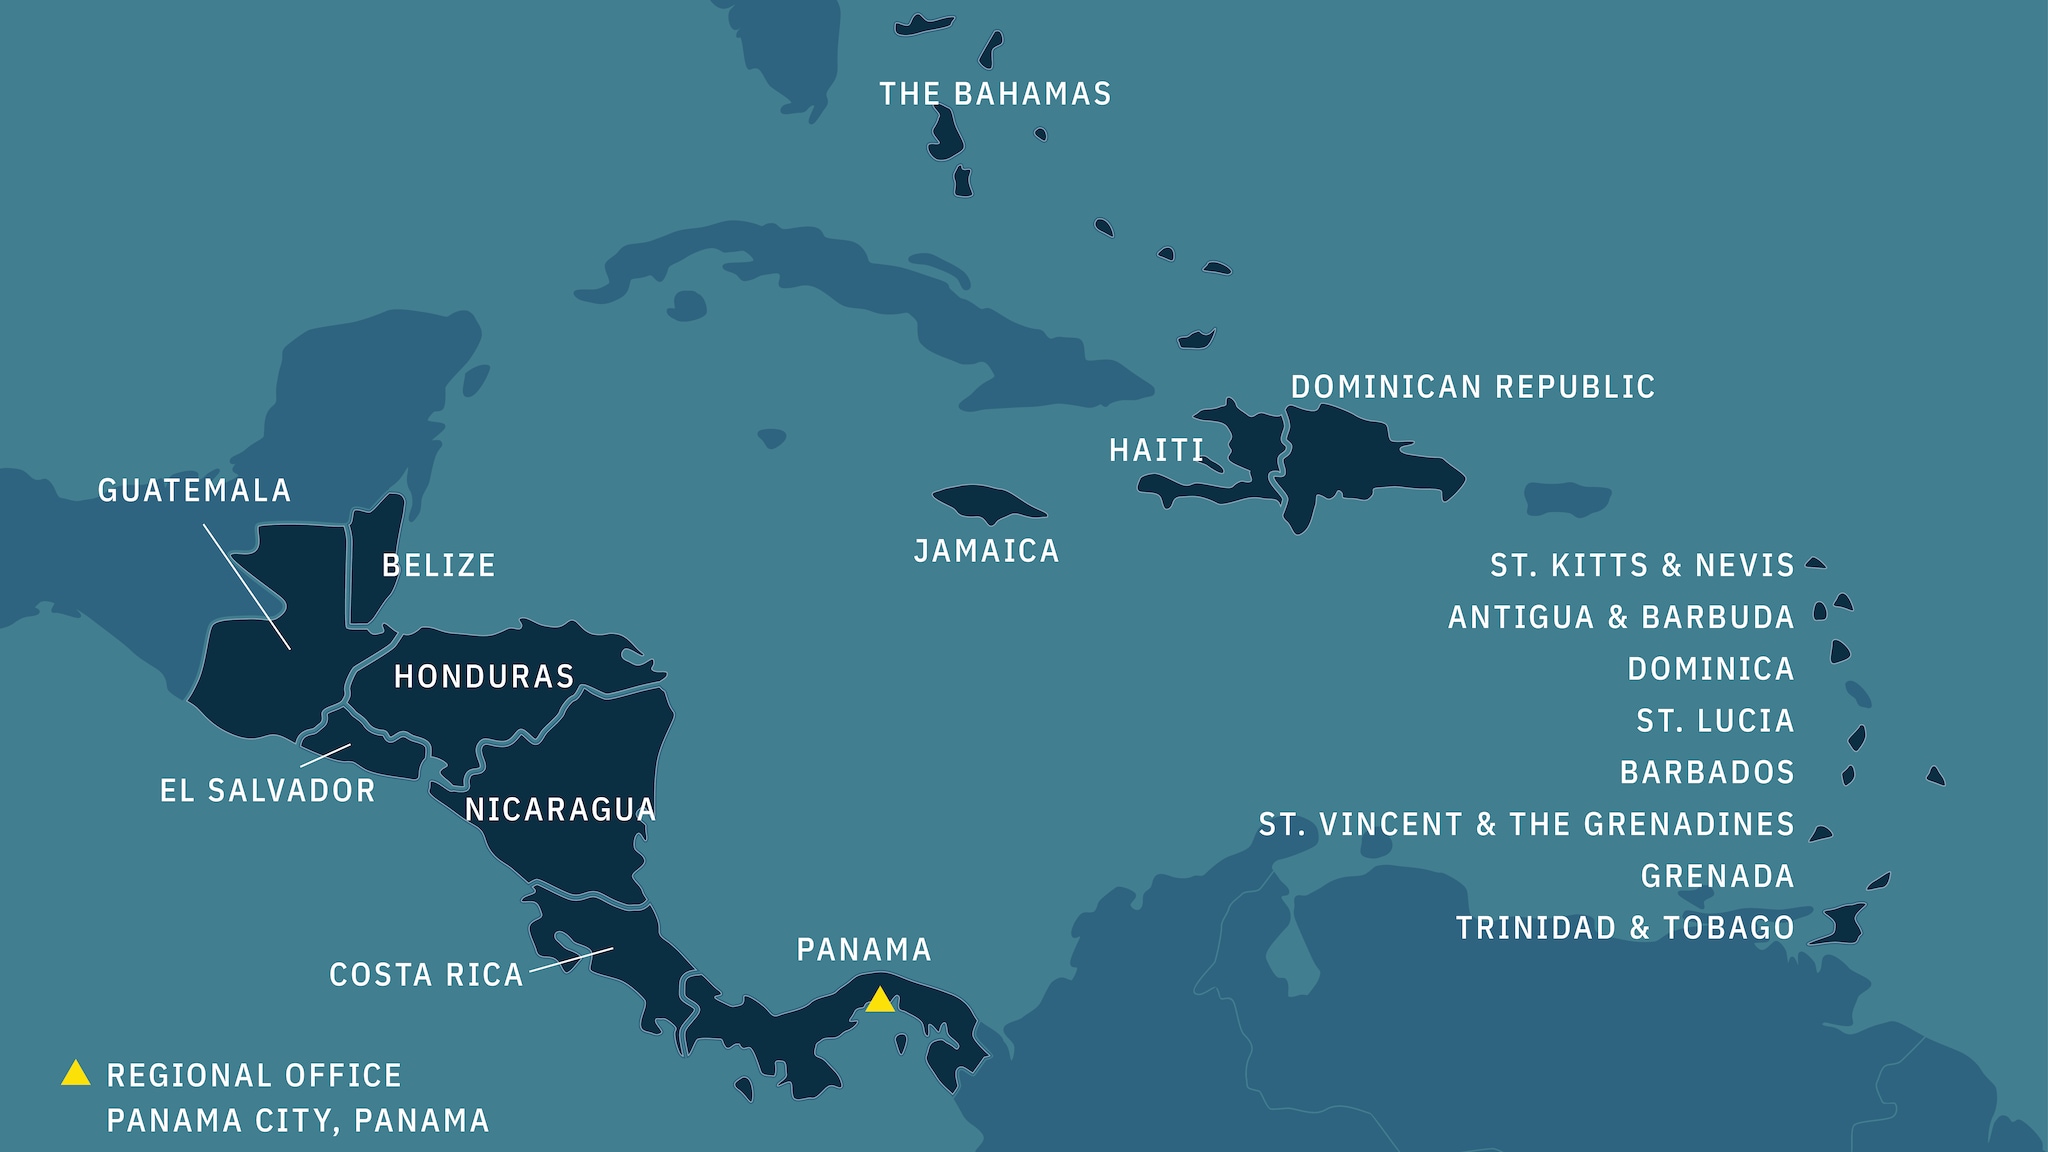 Countries included in the region: Belize, Costa Rica, El Salvador, Guatemala, Honduras, Nicaragua, Panama, Antigua and Barbuda, The Bahamas, Barbados, Dominica, Dominican Republic, Grenada, Guyana, Haiti, Jamaica, Saint Lucia, St. Kitts and Nevis, St. Vincent and the Grenadines, Suriname, Trinidad and Tobago